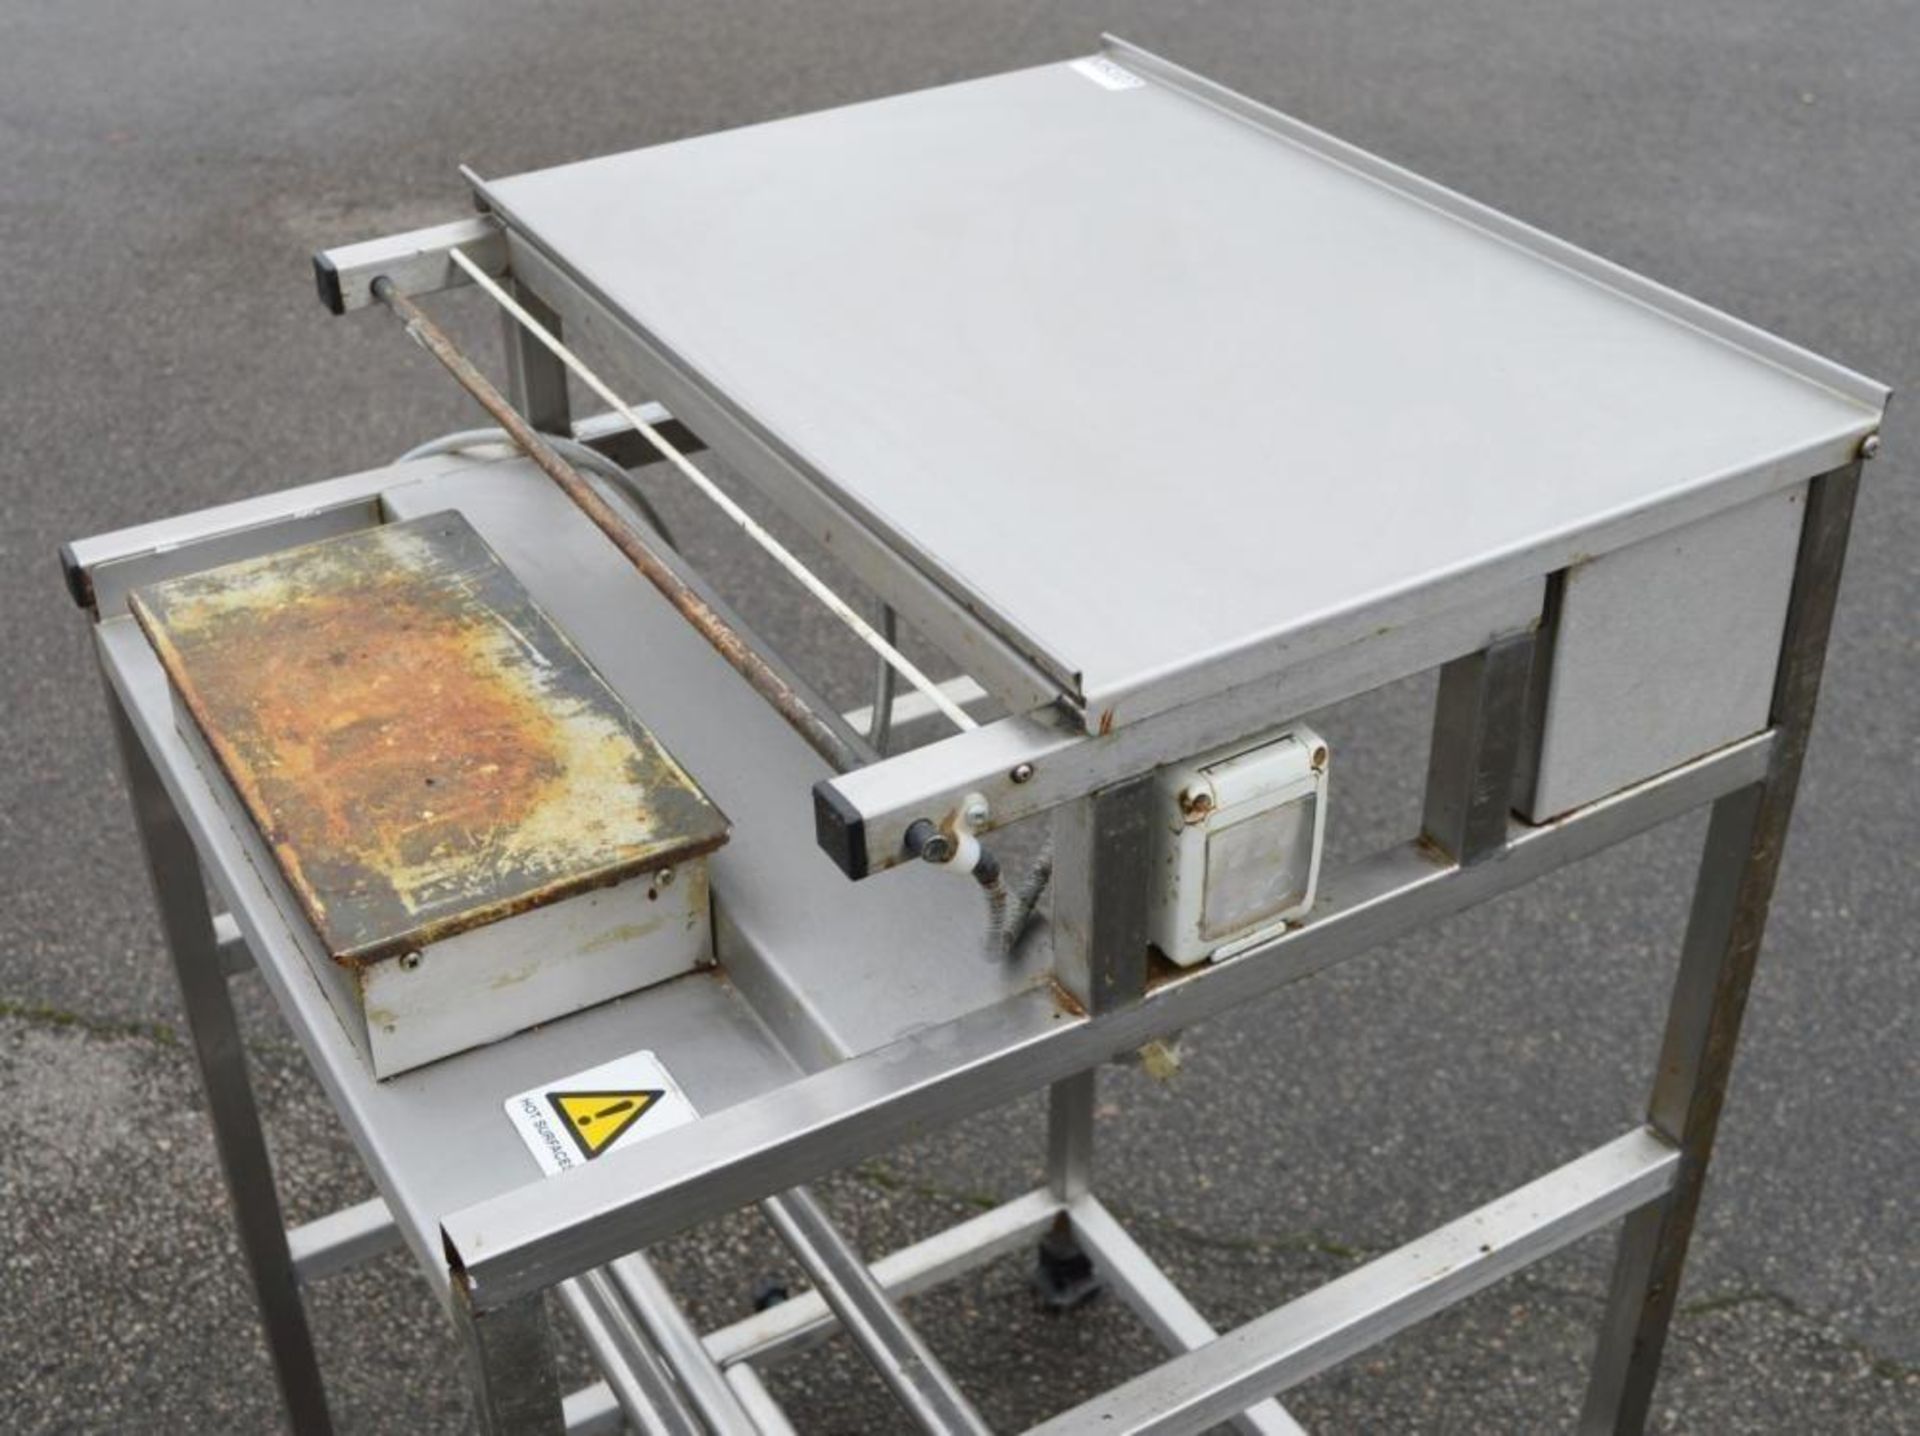 1 x Freestanding Stretch Wrap Tray Overwapper Machine - Stainless Steel Constructons - 240v - - Image 3 of 7